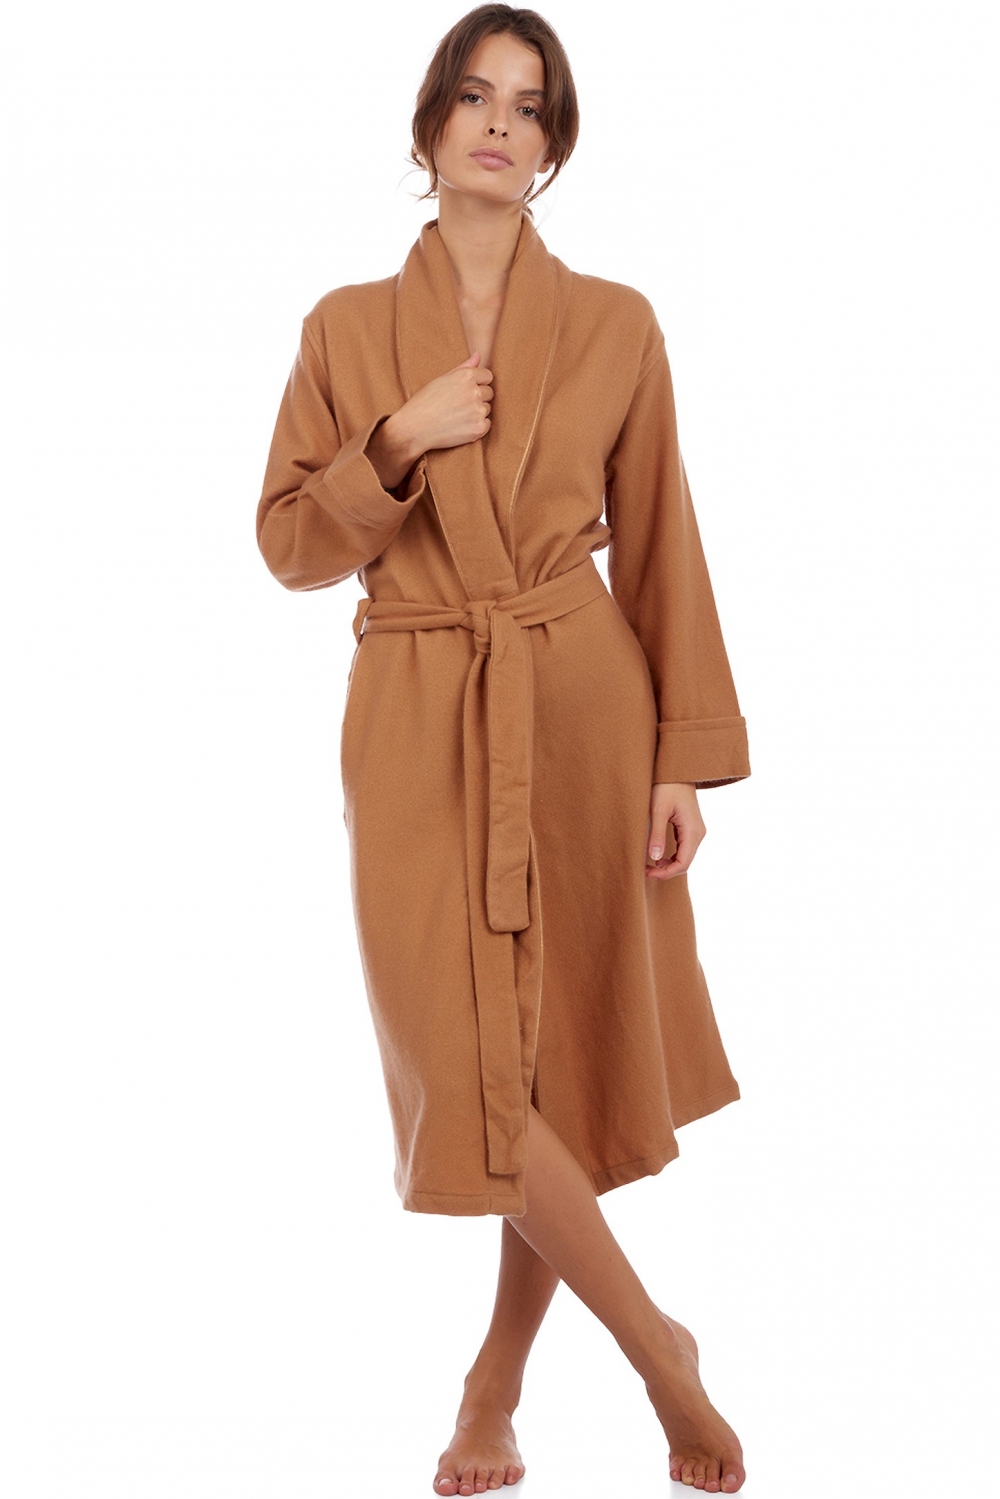 Women's Velour Soft Touch Hooded Bath Robe, Ladies Dressing Gown – OLIVIA  ROCCO